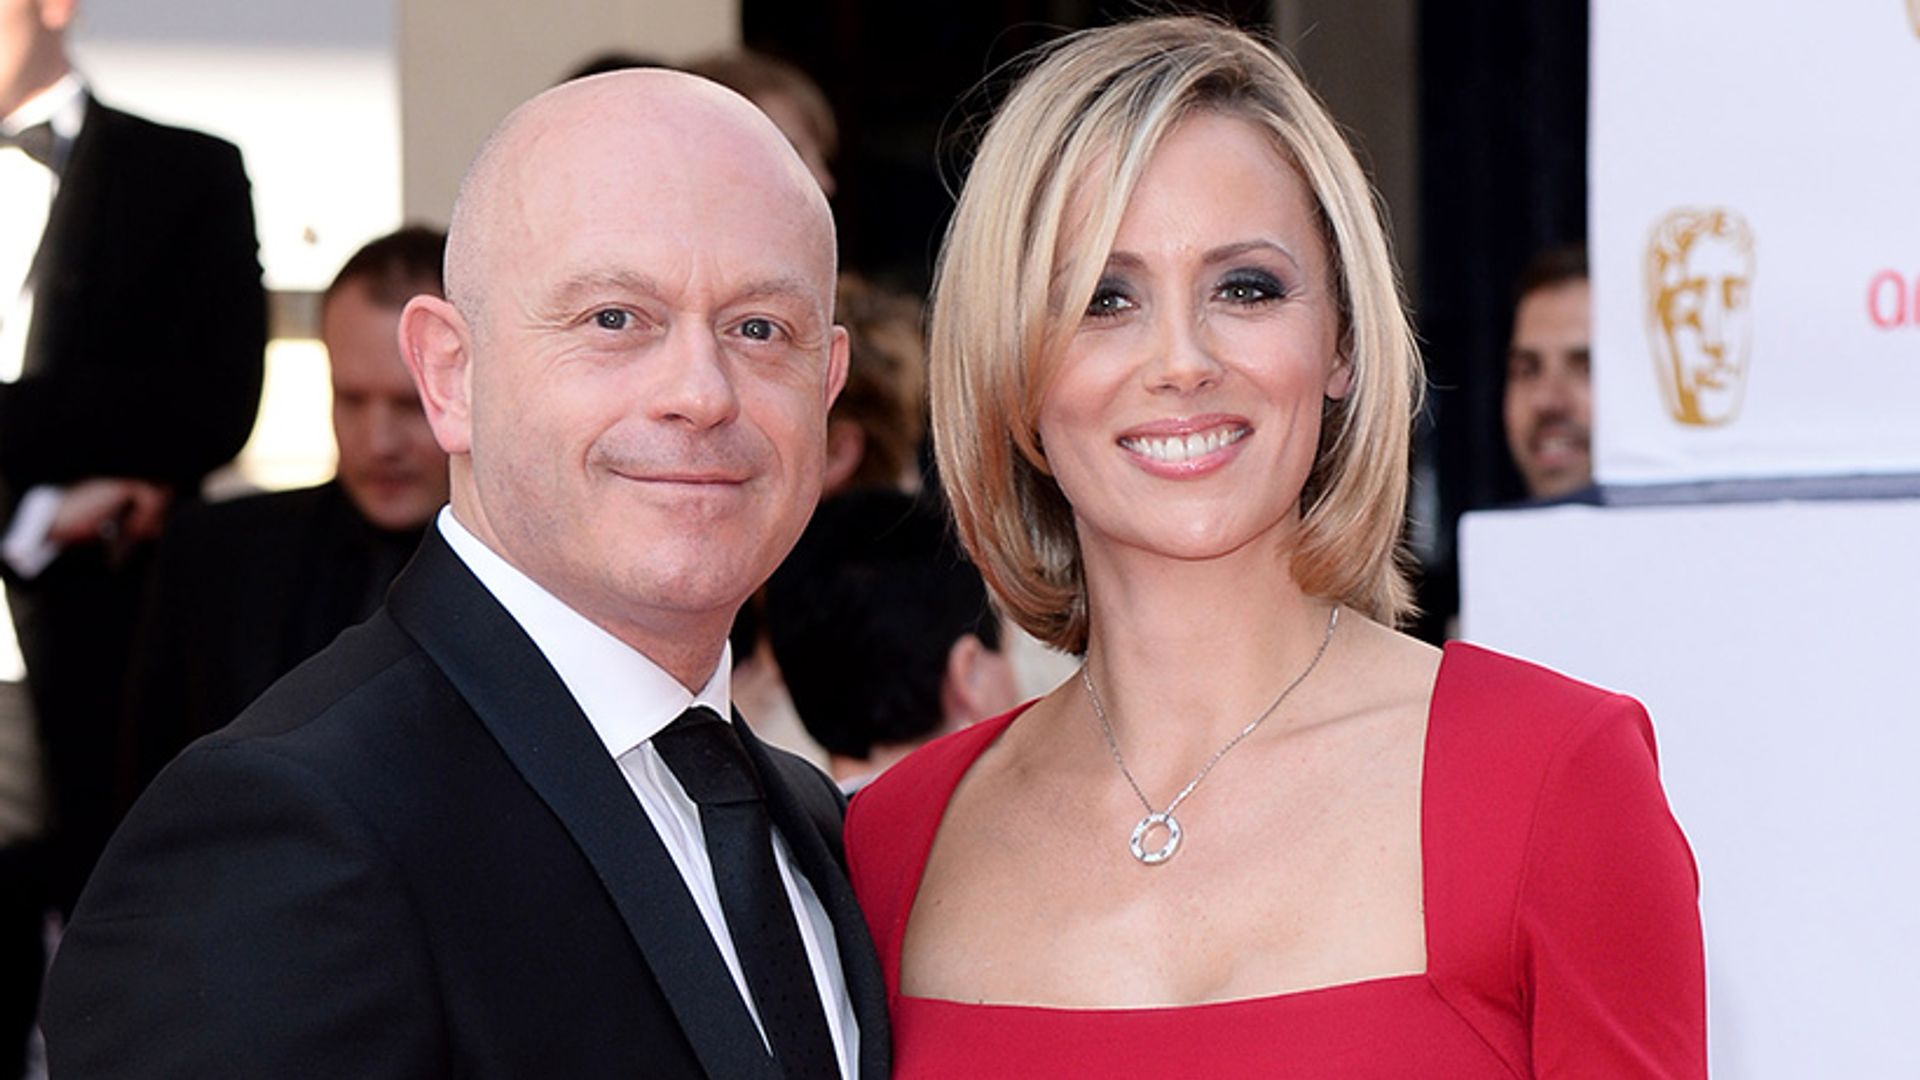 Ross Kemp cuddles his newborn twin girls in adorable photo – see the snap!